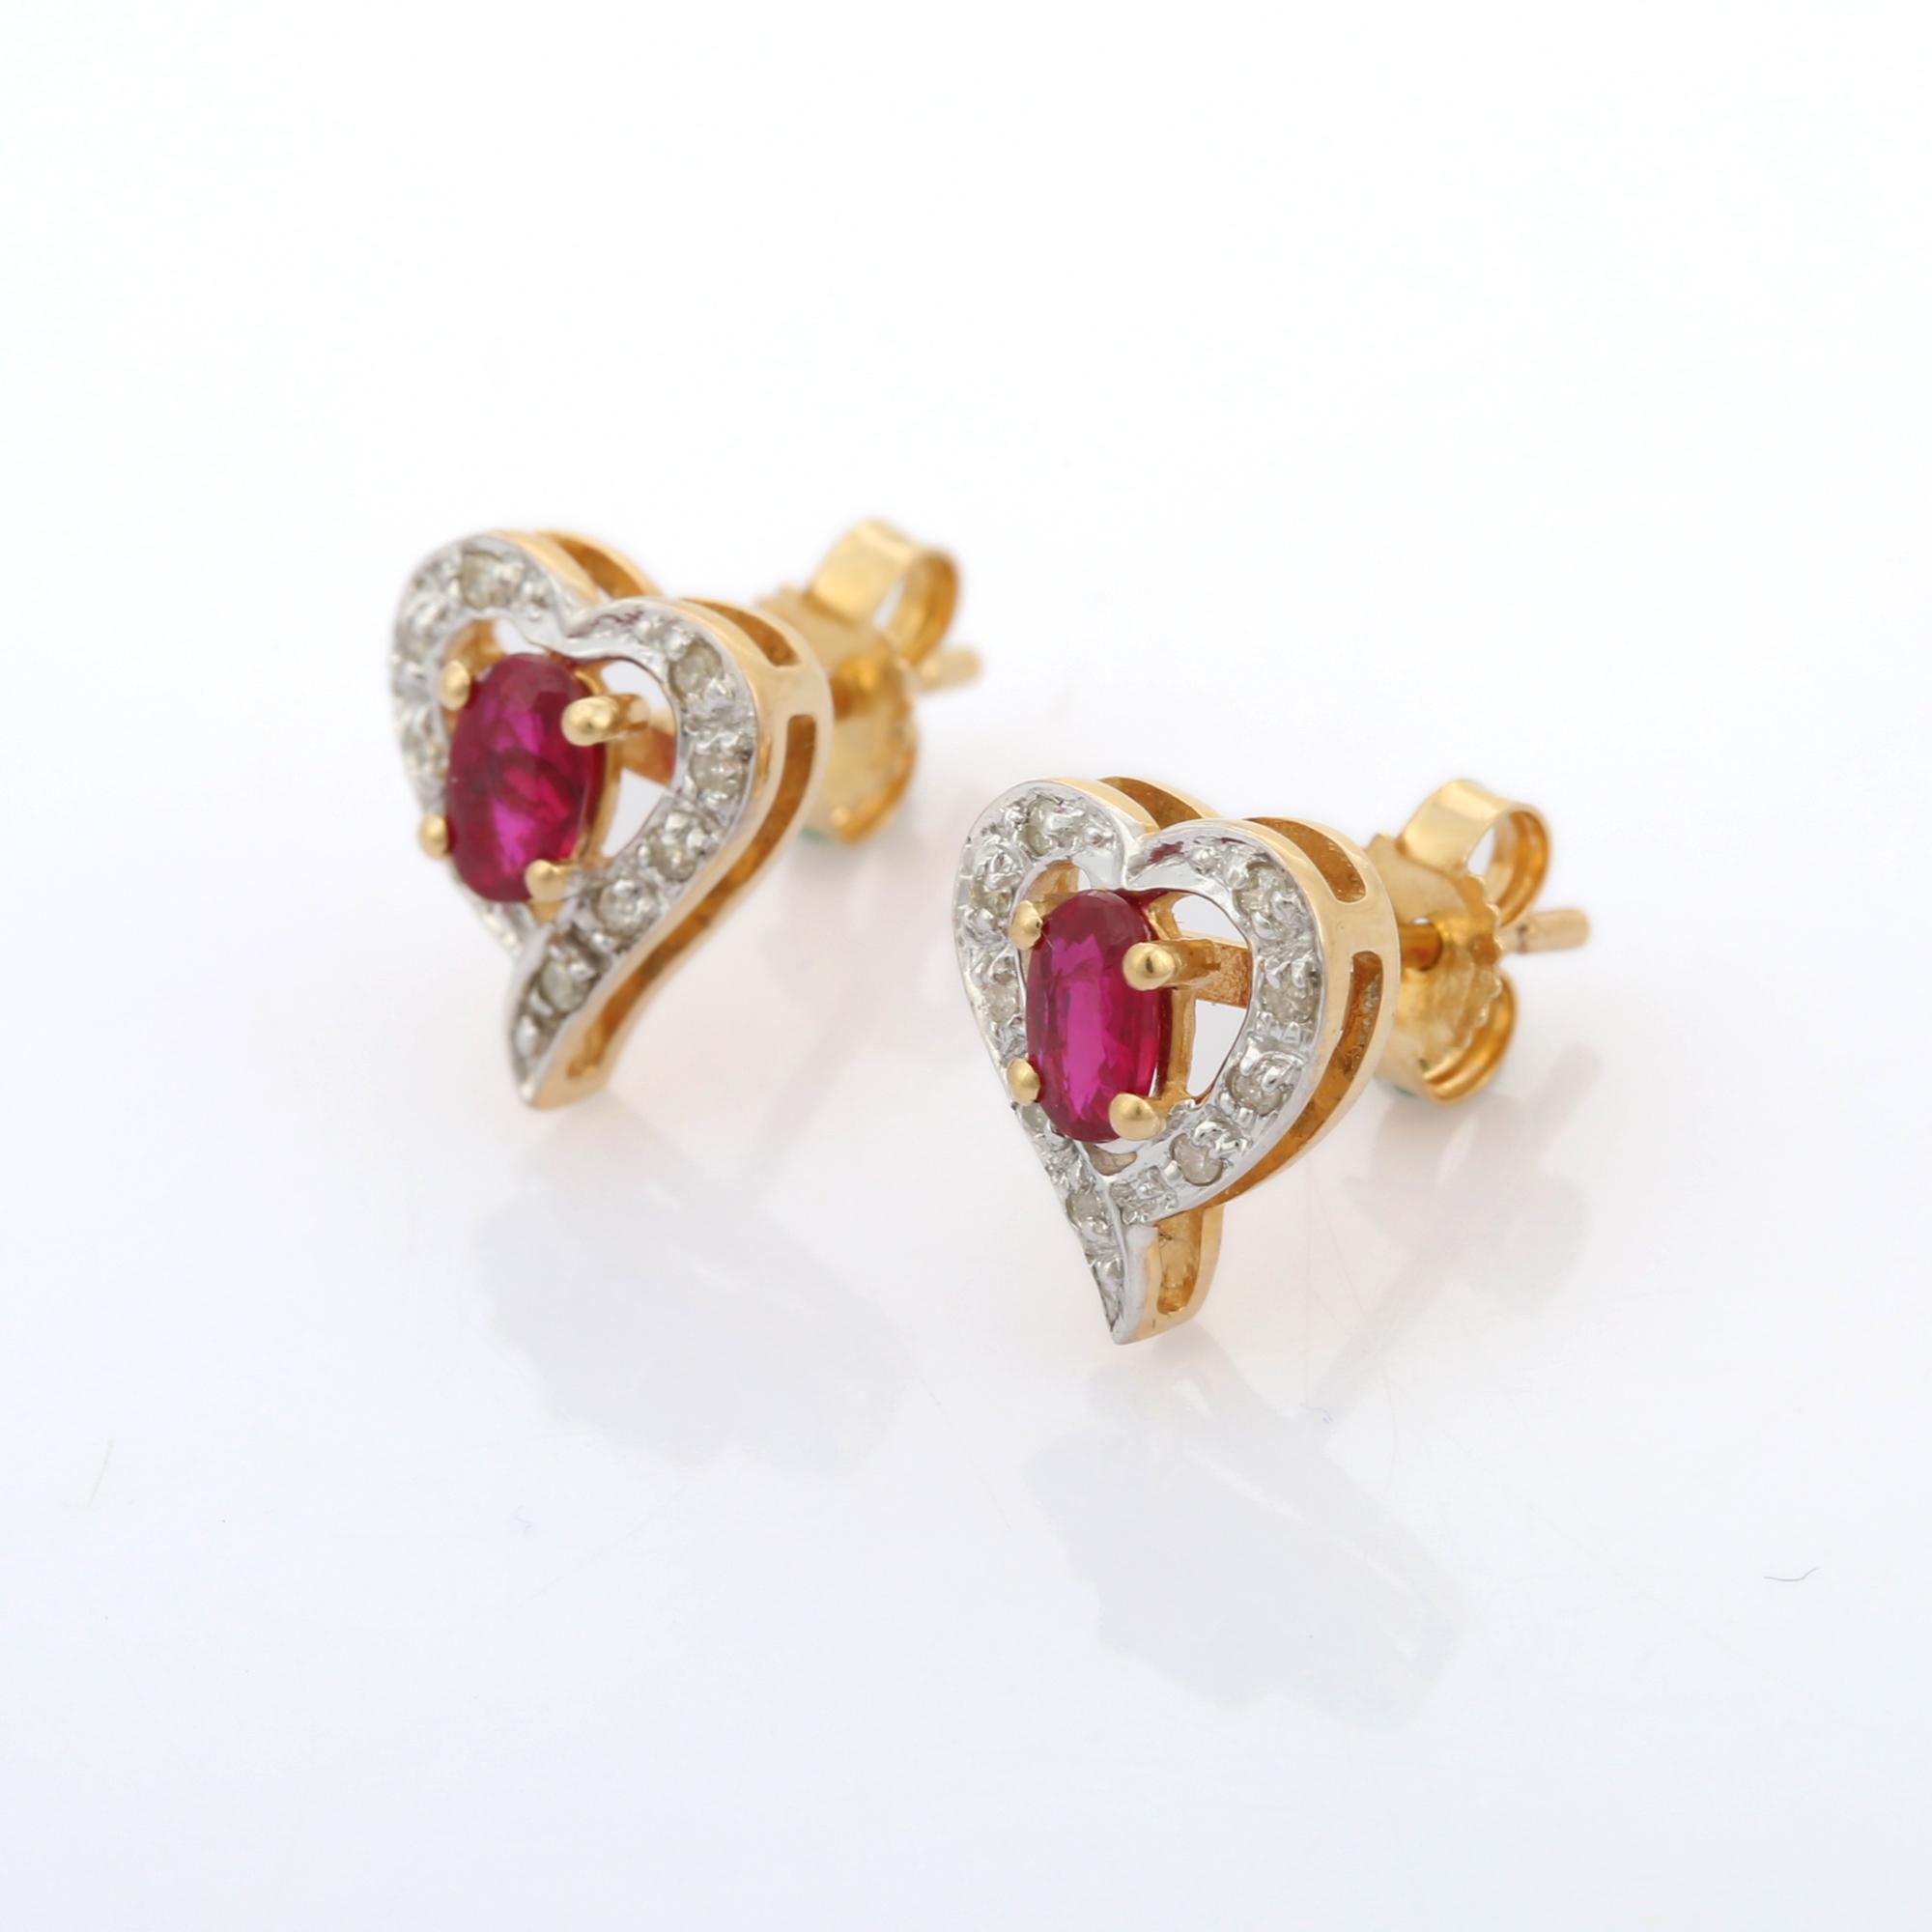 Studs create a subtle beauty while showcasing the colors of the natural precious gemstones and illuminating diamonds making a statement.
Designer Ruby Diamond Heart Stud Earrings in 14K gold. Embrace your look with these stunning pair of earrings